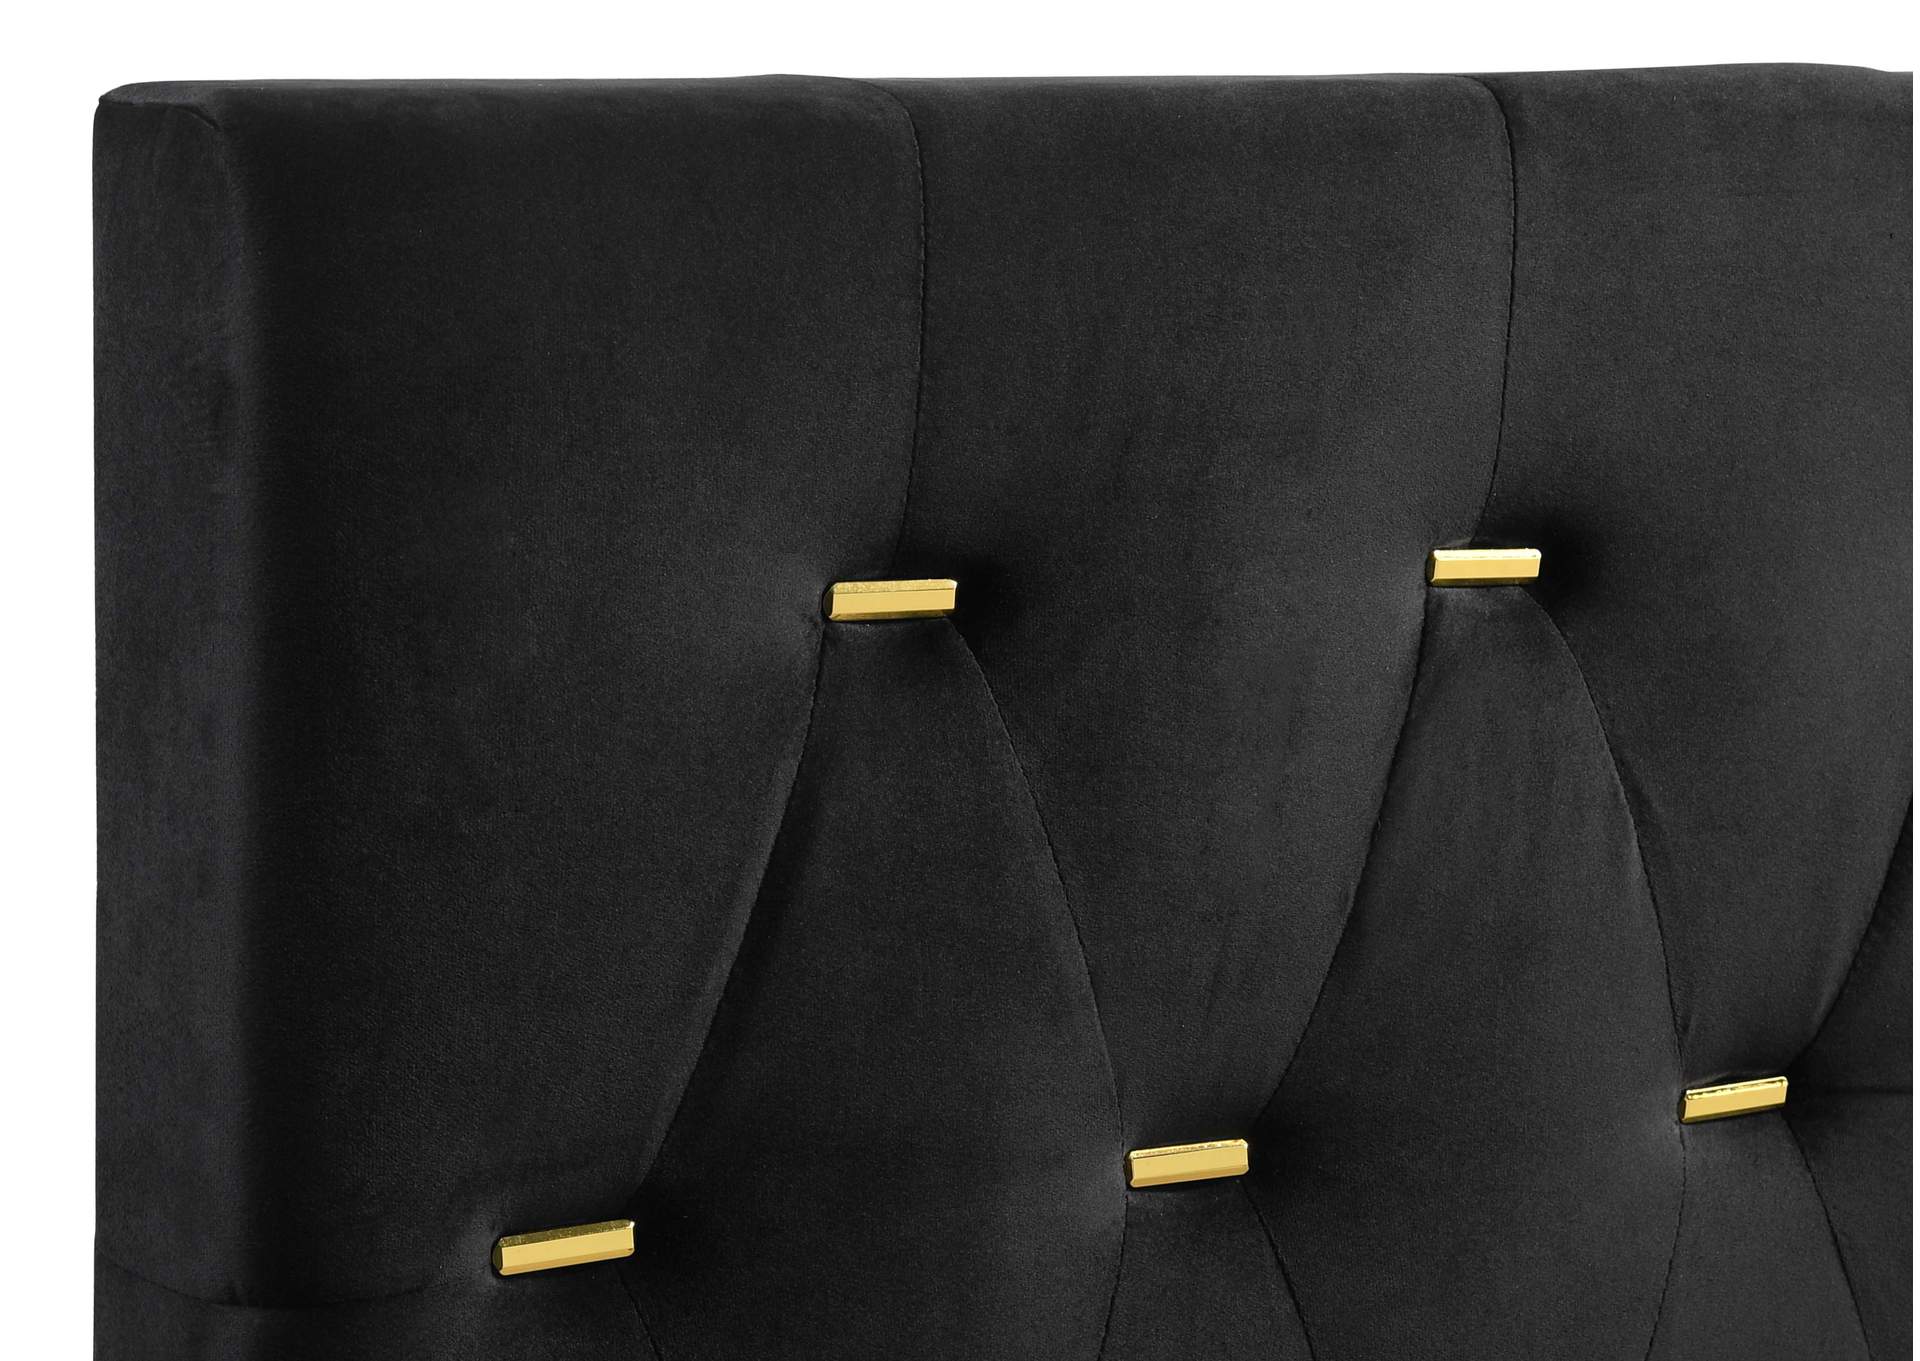 Kendall Tufted Panel California King Bed Black and Gold,Coaster Furniture